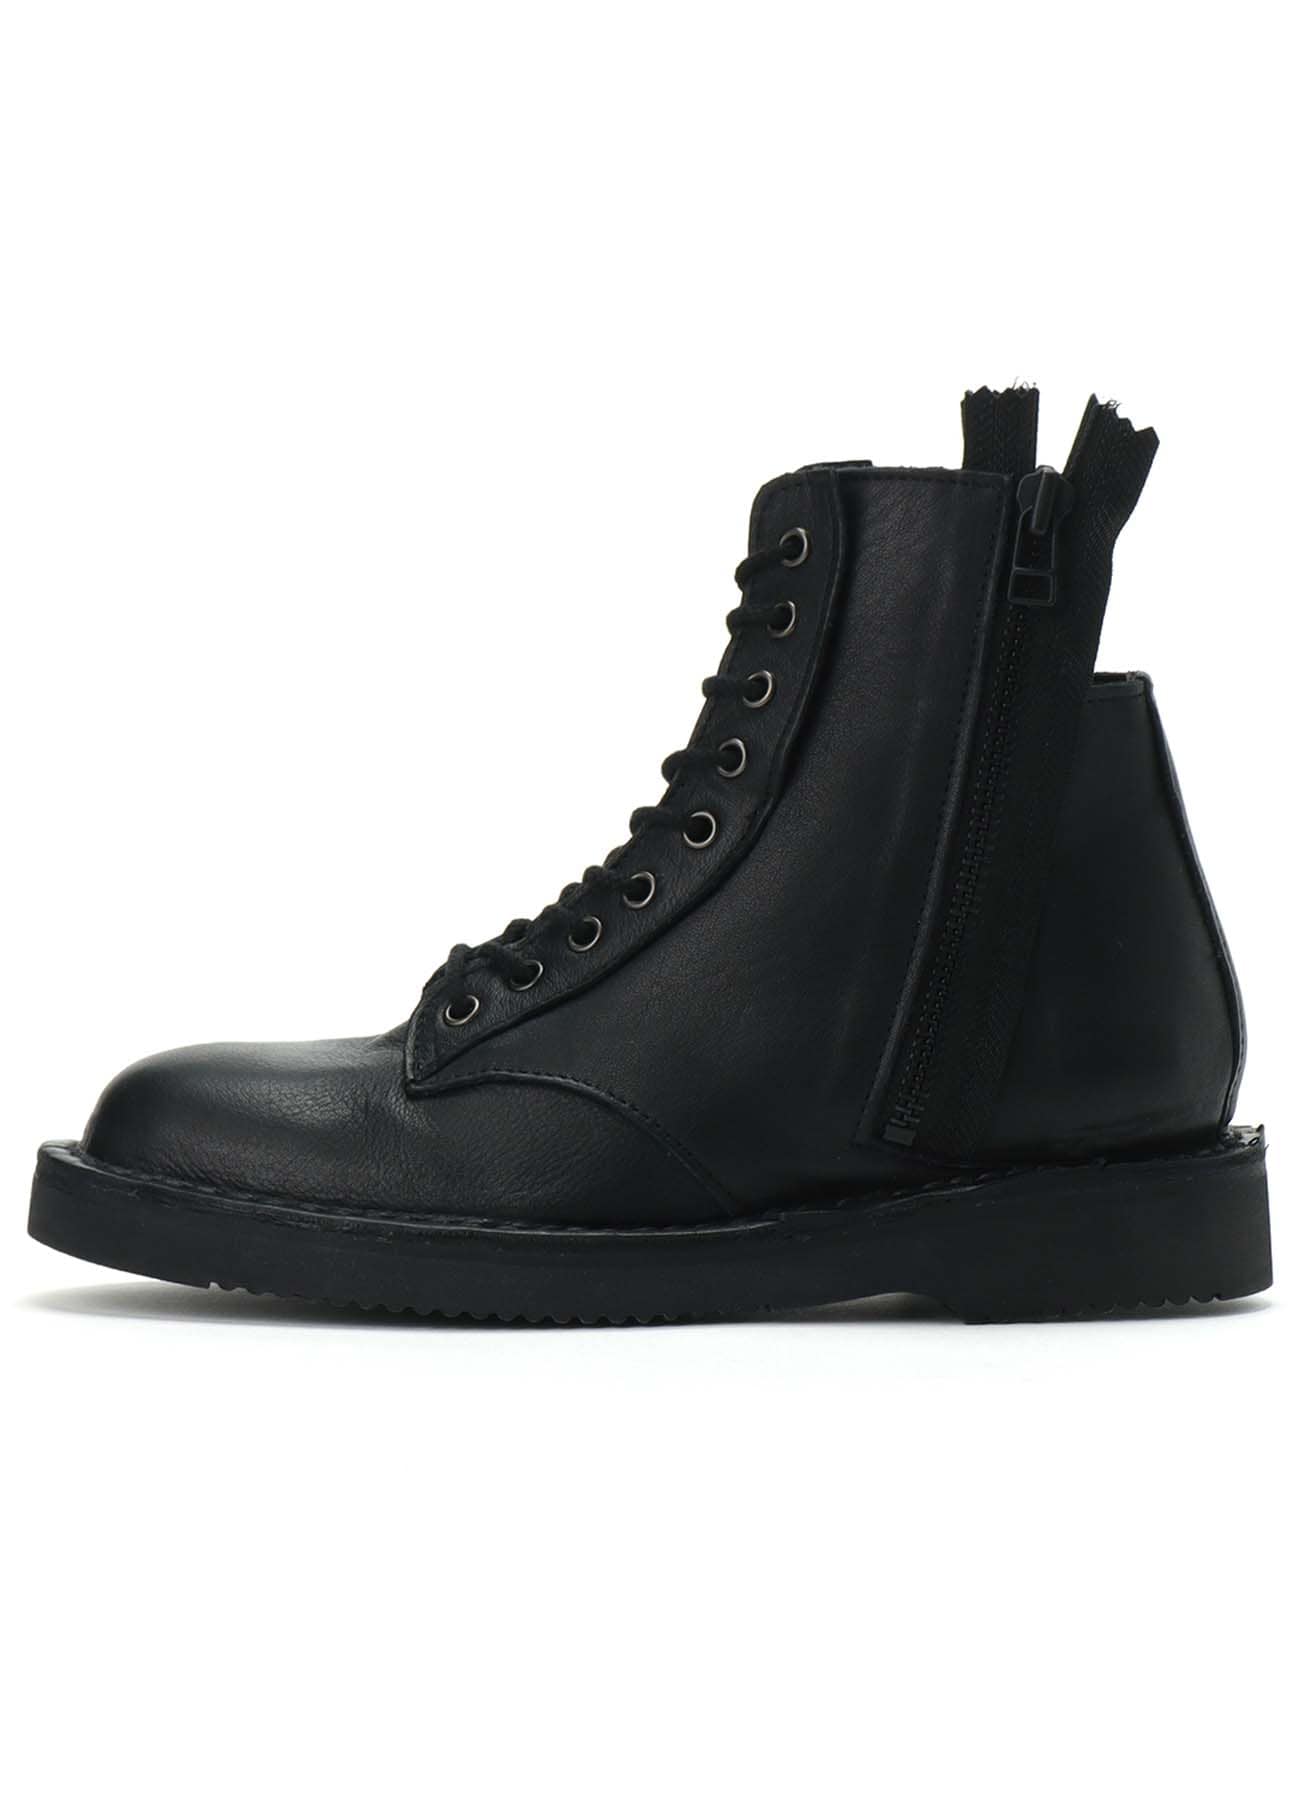 ITALIAN SOFT LEATHER LACE-UP TWO ZIPS BOOTS